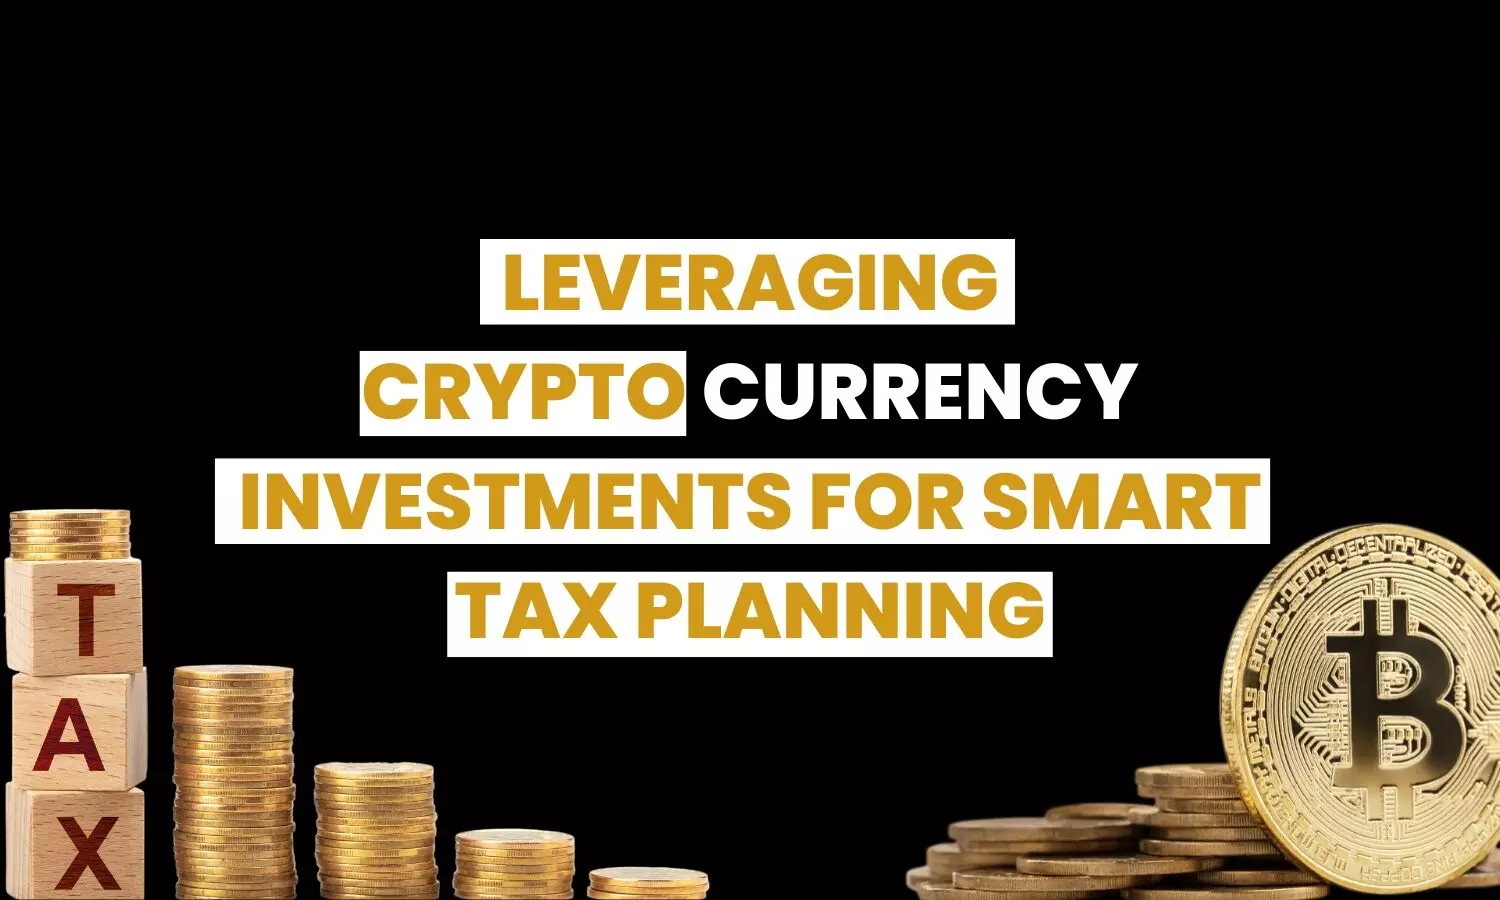 Leveraging Cryptocurrency Investments for Smart Tax Planning